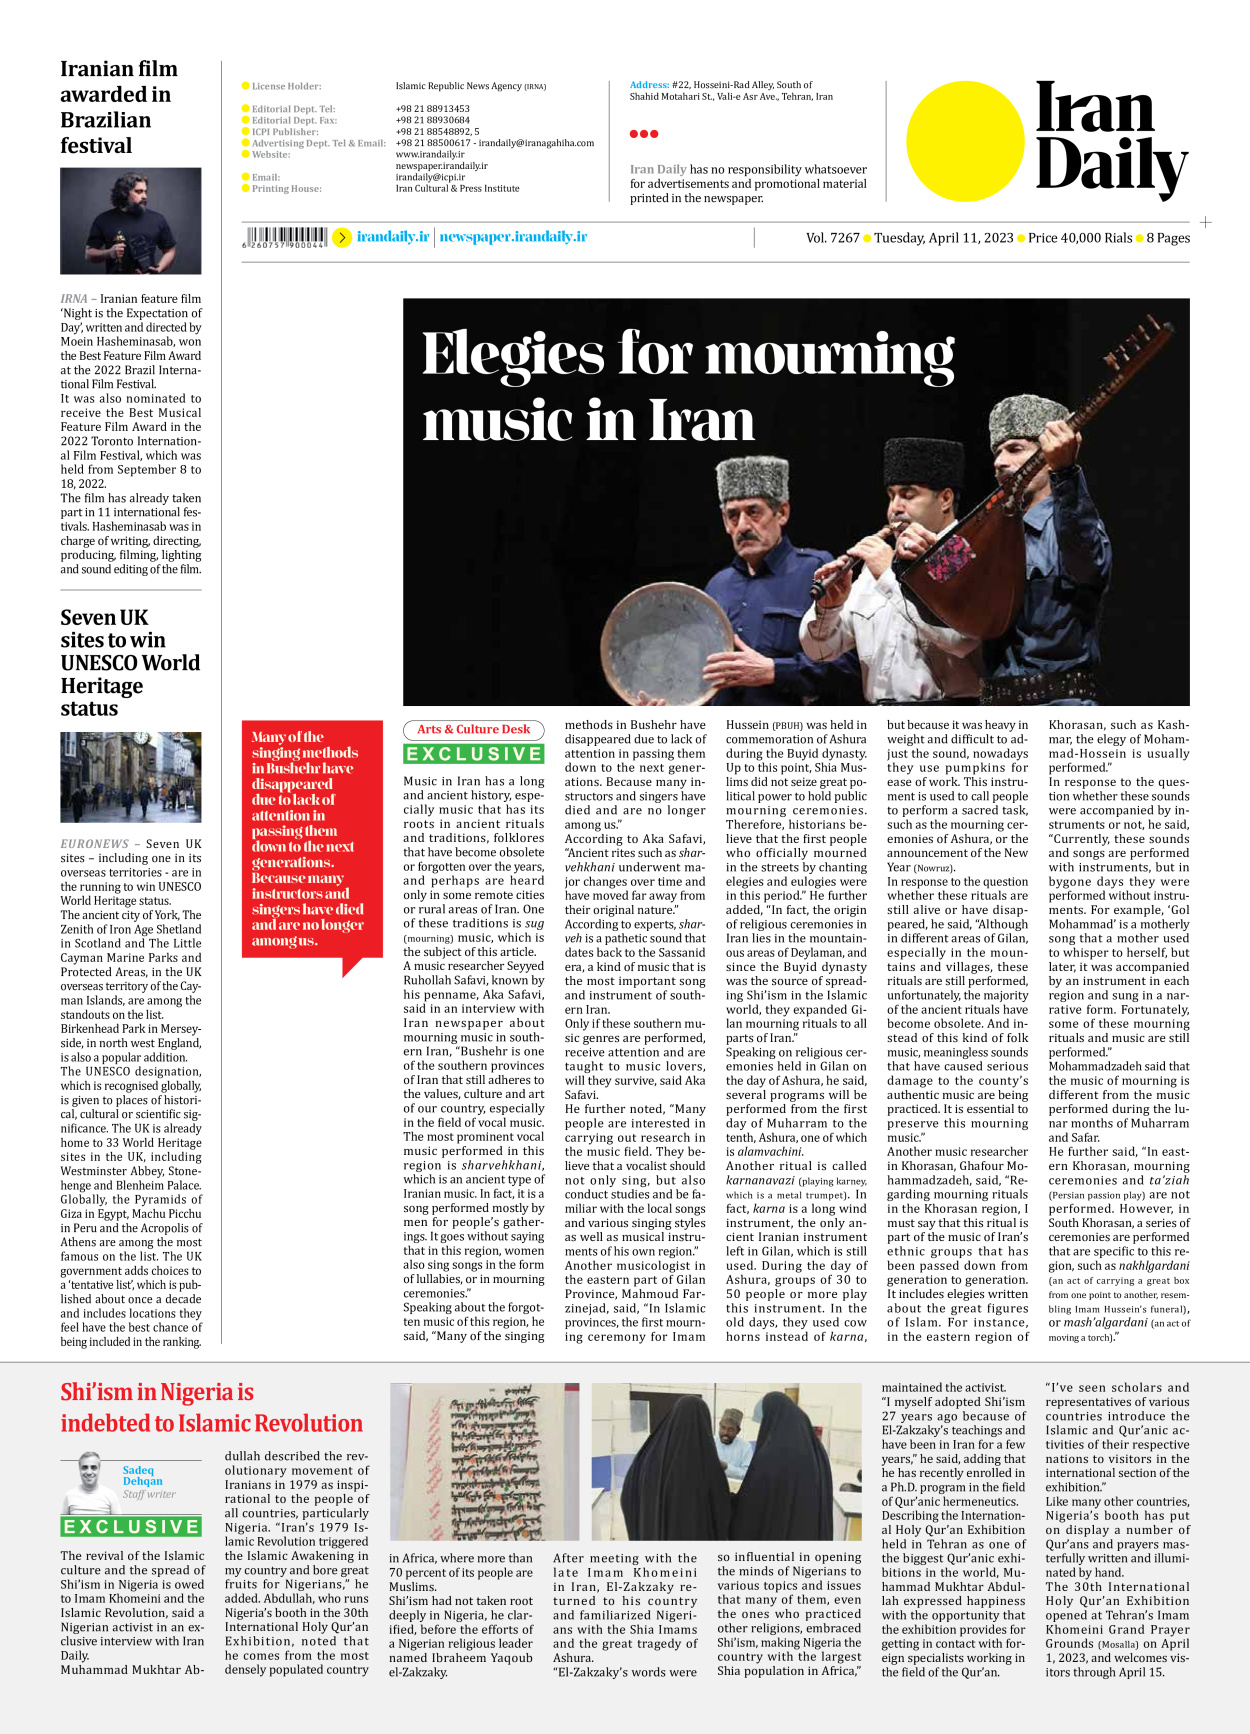 Iran Daily - Number Seven Thousand Two Hundred and Sixty Seven - 11 April 2023 - Page 8